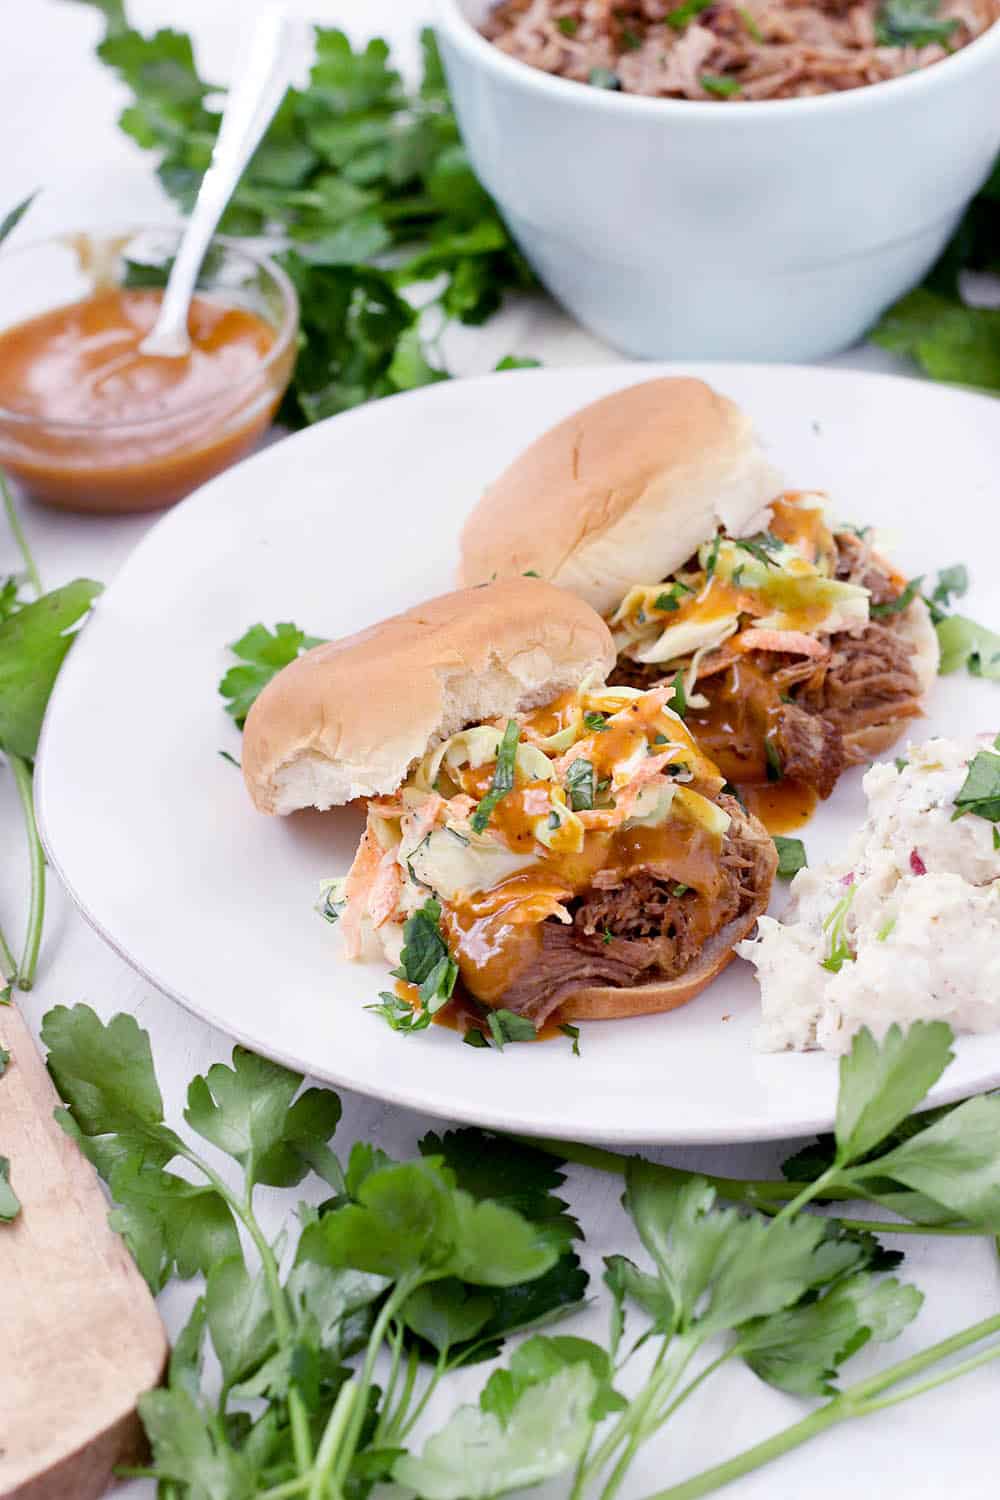 This Instant Pot Pulled Pork is a quick and easy recipe to feed a crowd! I love it served on slider buns with coleslaw or on tortillas with cilantro and onion. It's inexpensive, and the leftovers freeze beautifully.